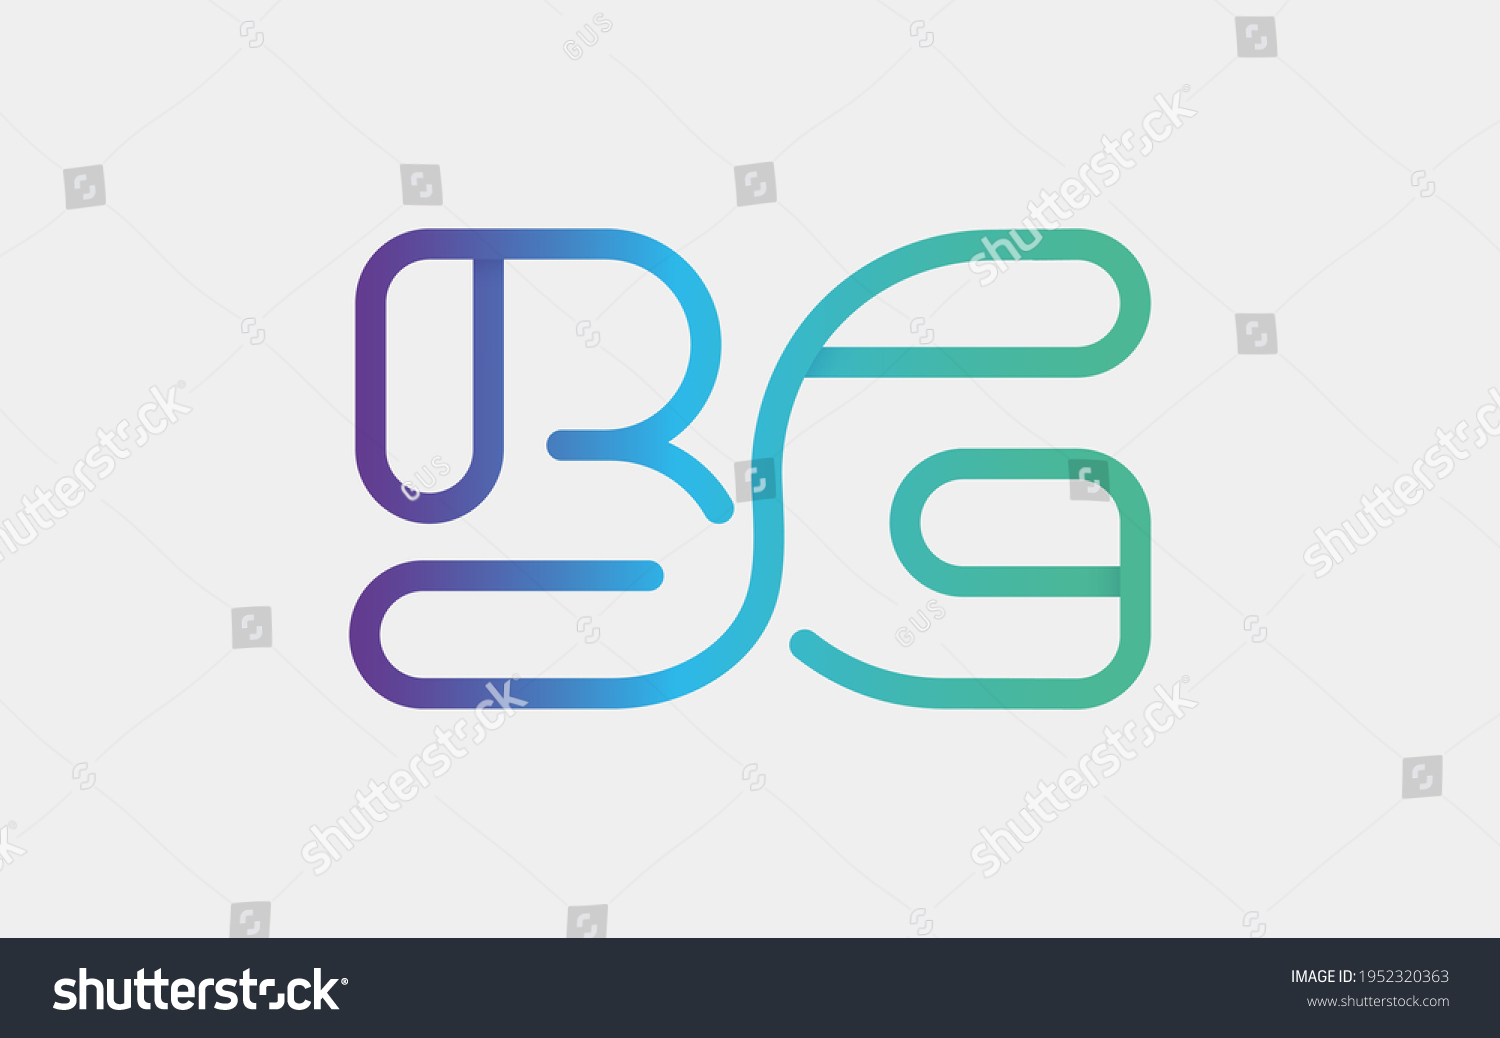 SVG of BG Monogram tech with a monoline style. Looks playful but still simple and futuristic. A perfect logo for your tech company or any futuristic design project. svg